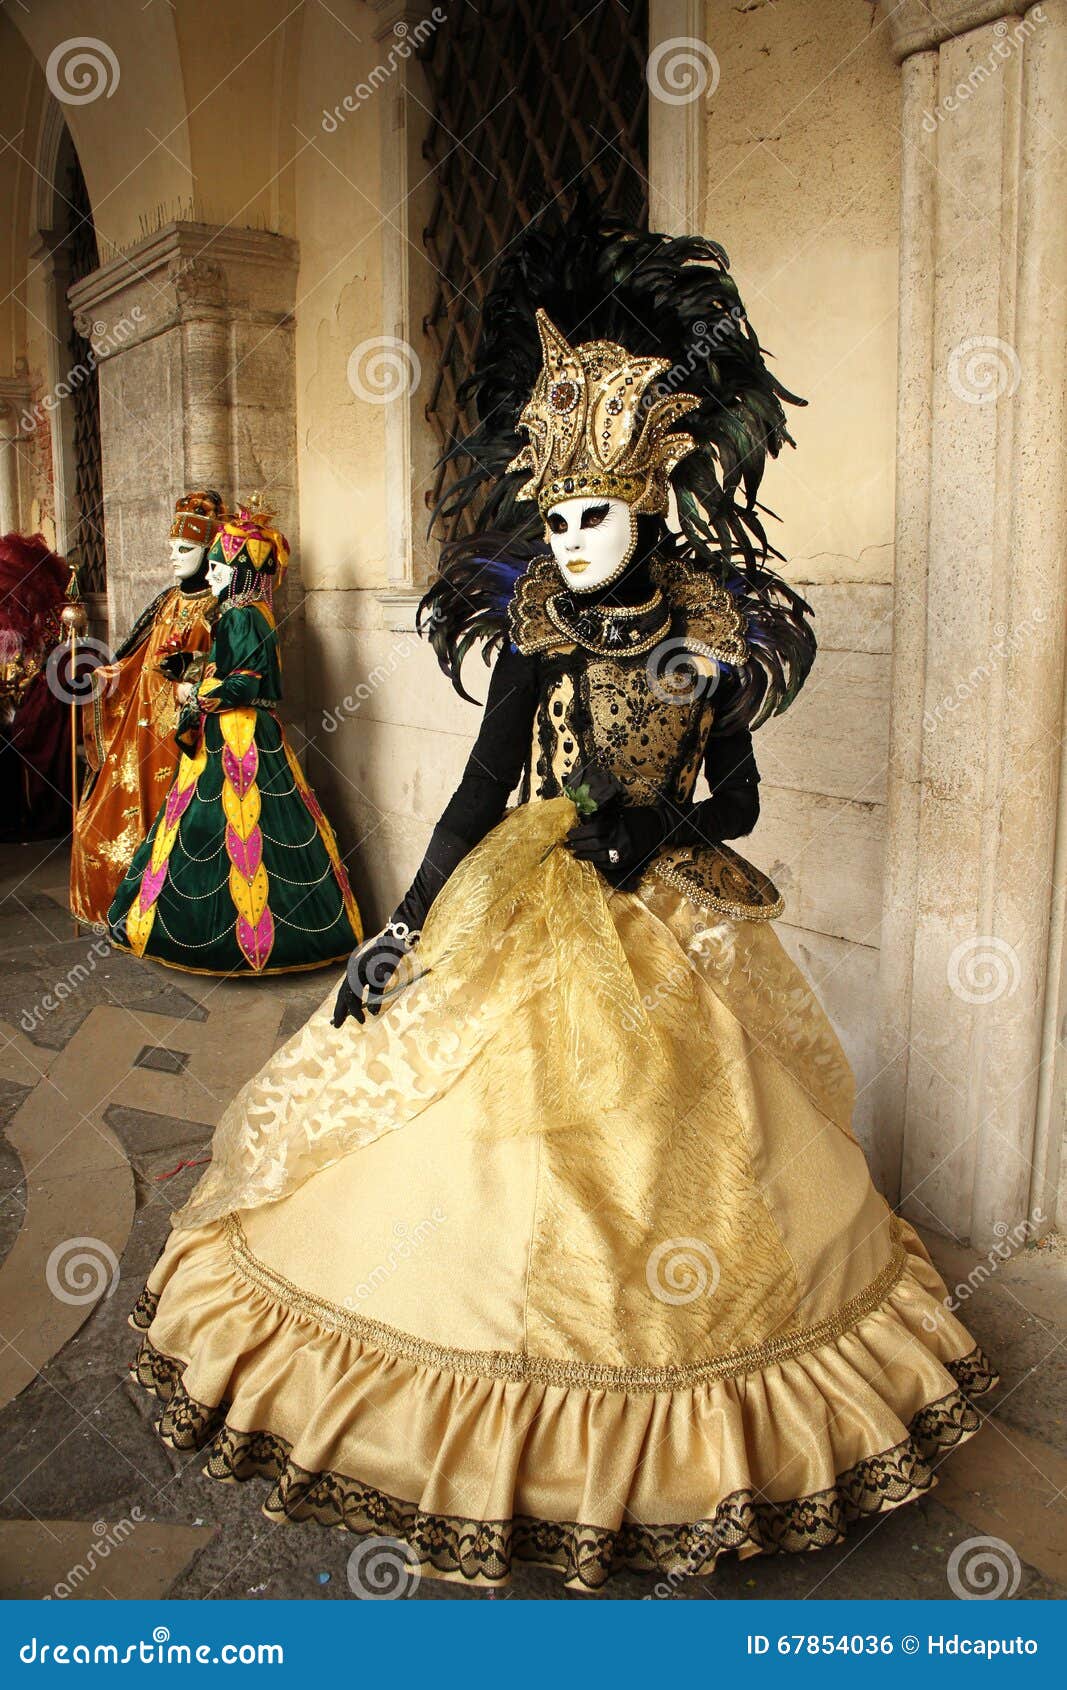 Finding Masquerade Costumes  LoveToKnow